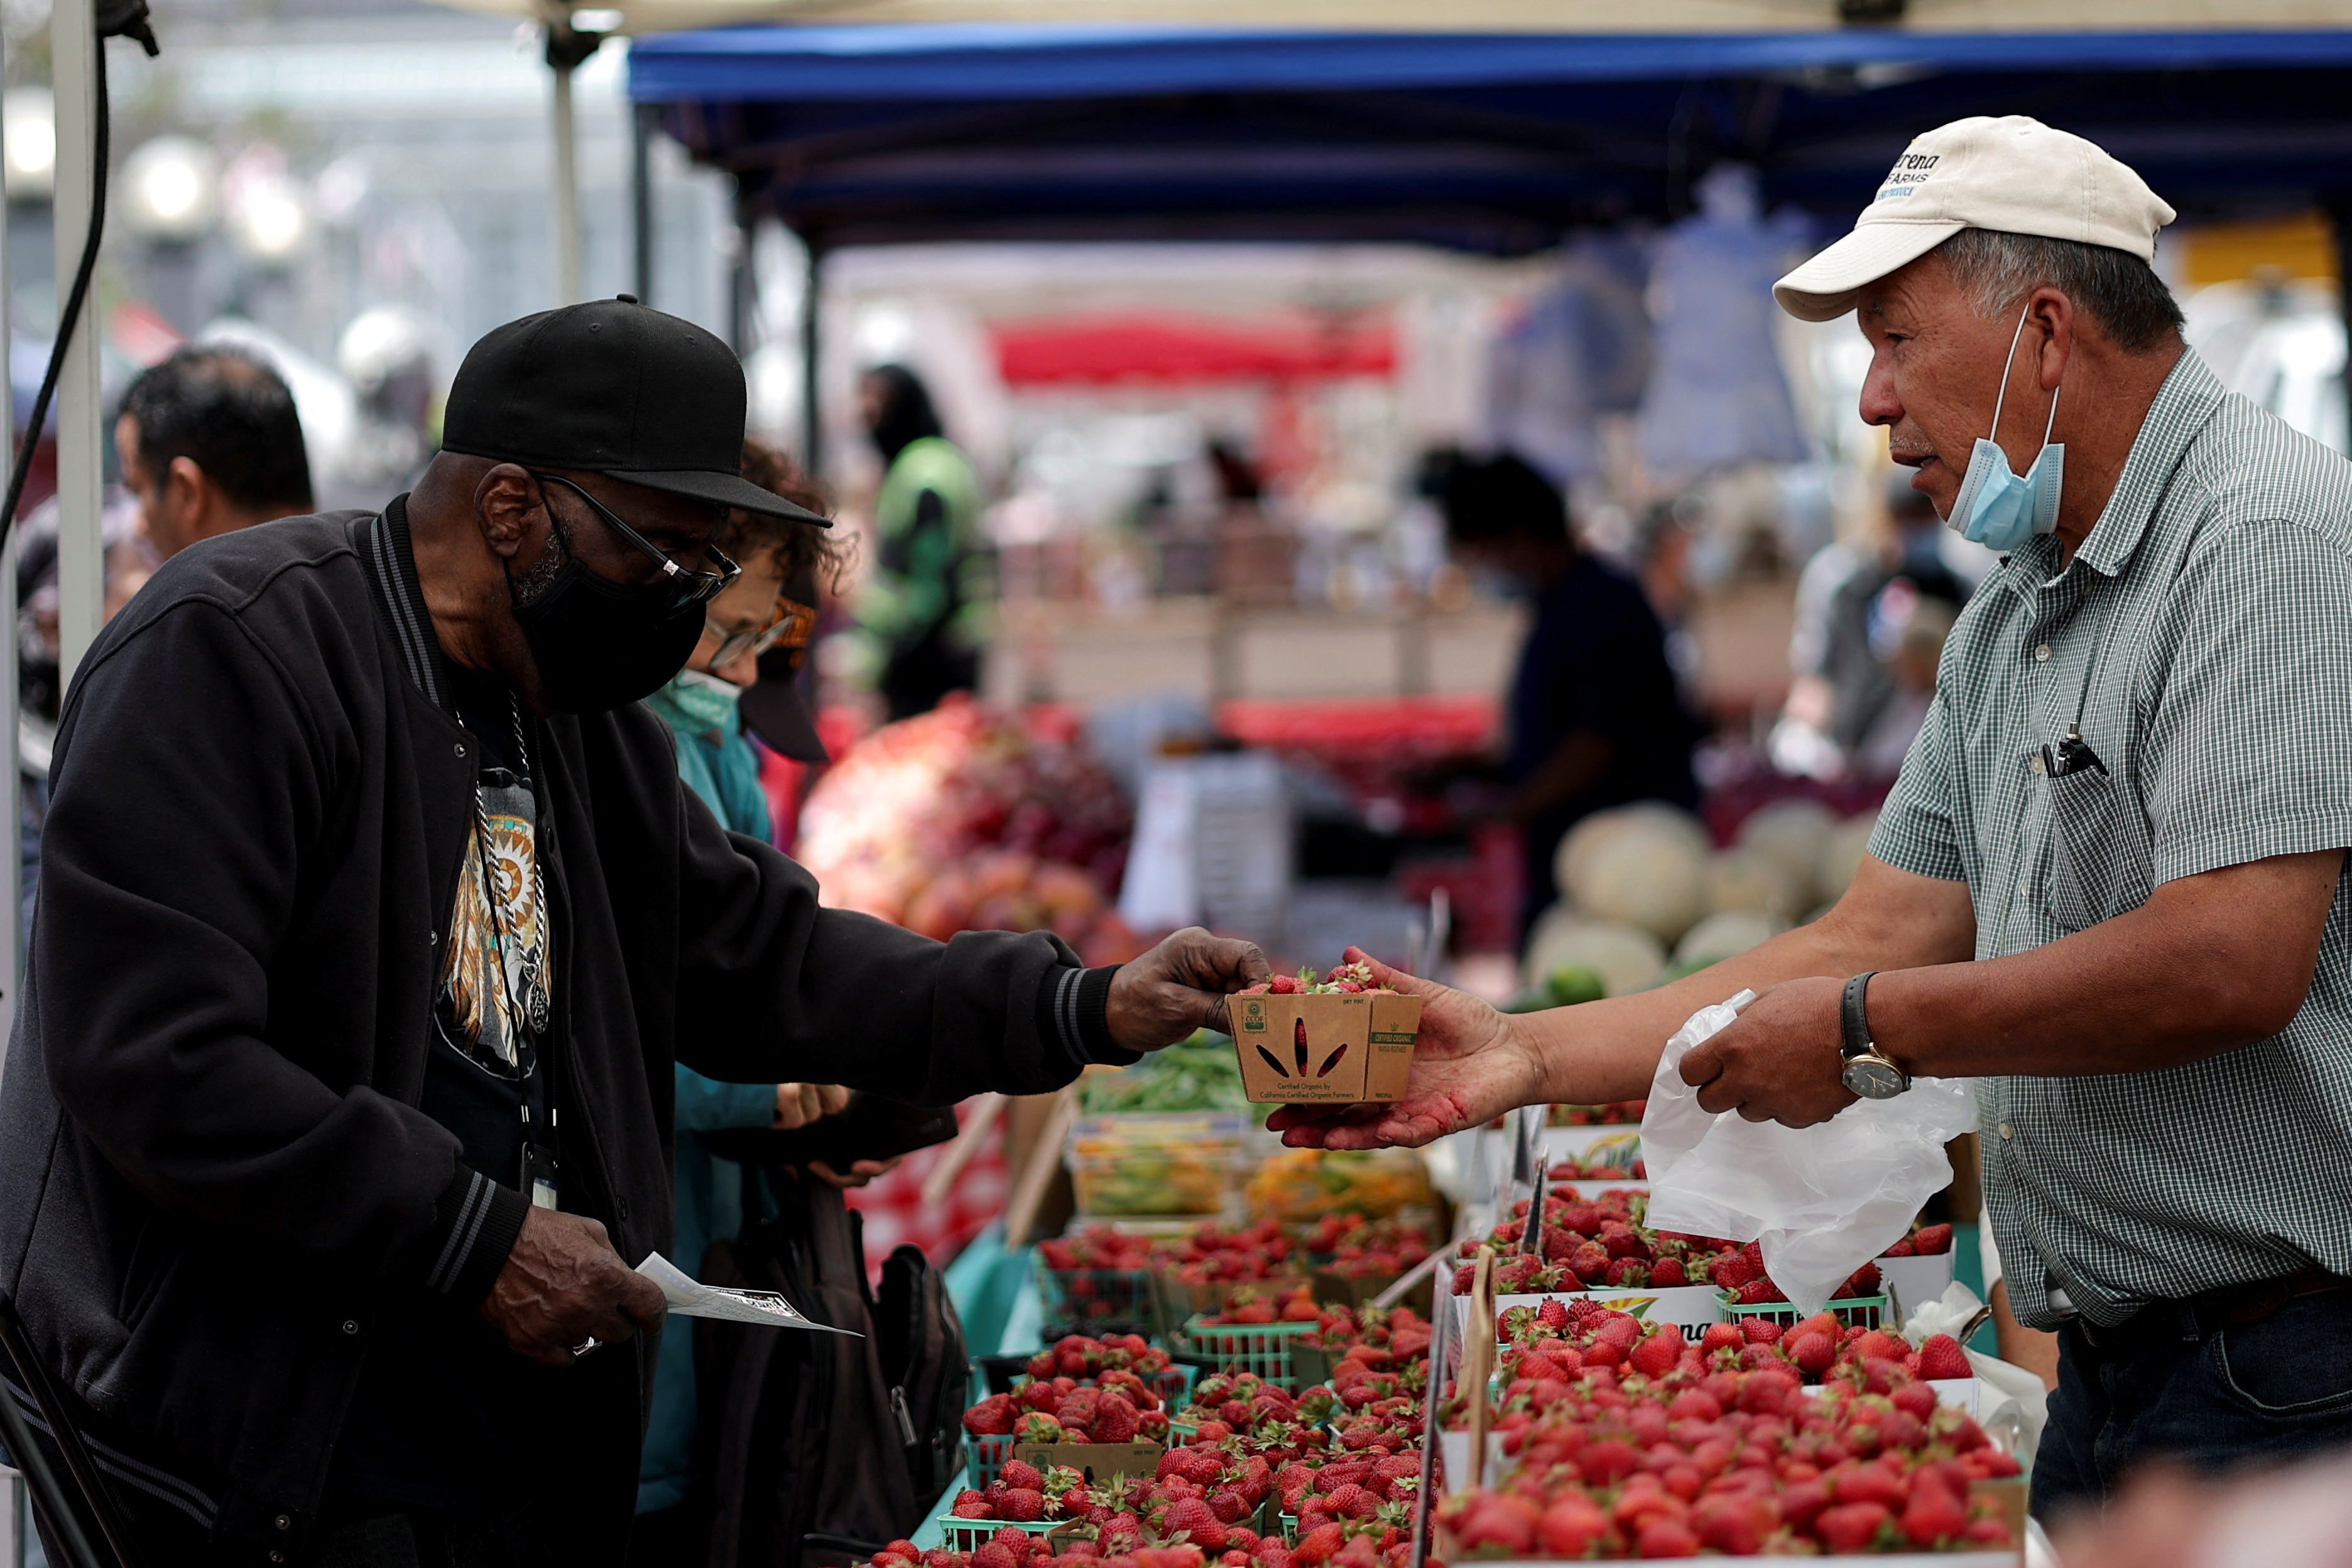 A resident buys strawberries at a local market in San Francisco, California